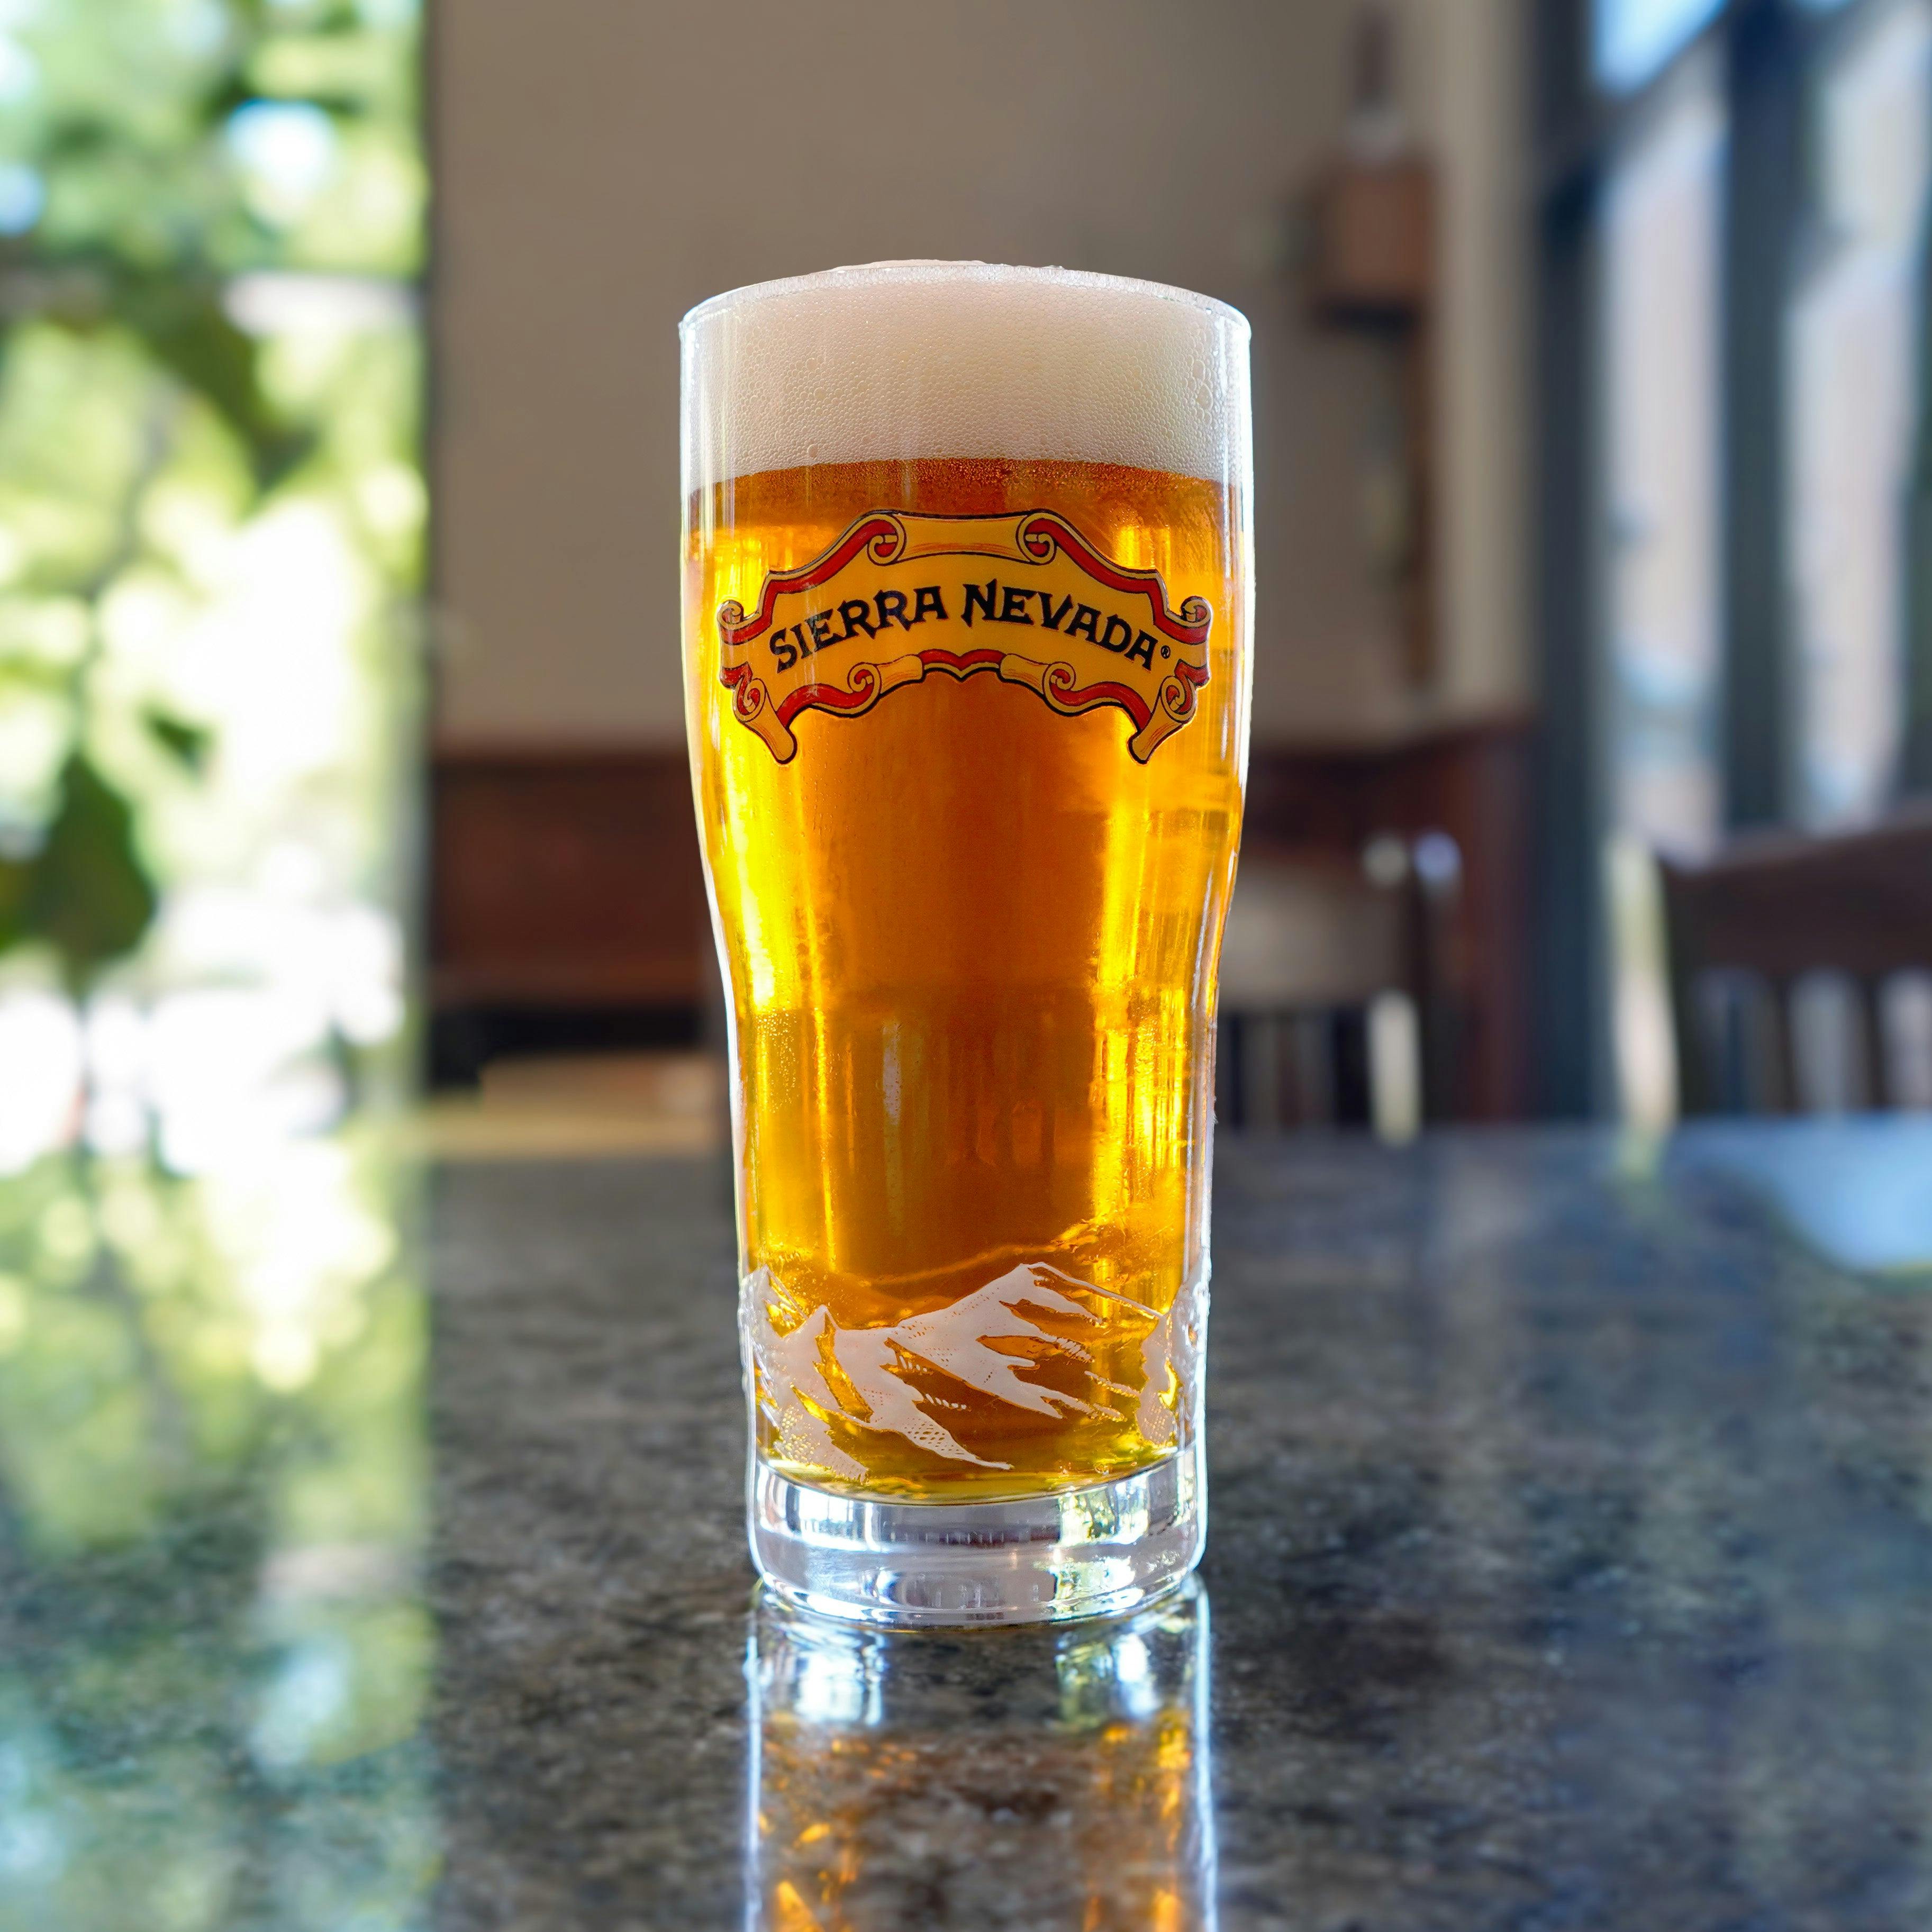 Sierra Nevada Brewing Co. Brewhouse Tumbler 16oz. pint glass sitting on the bar